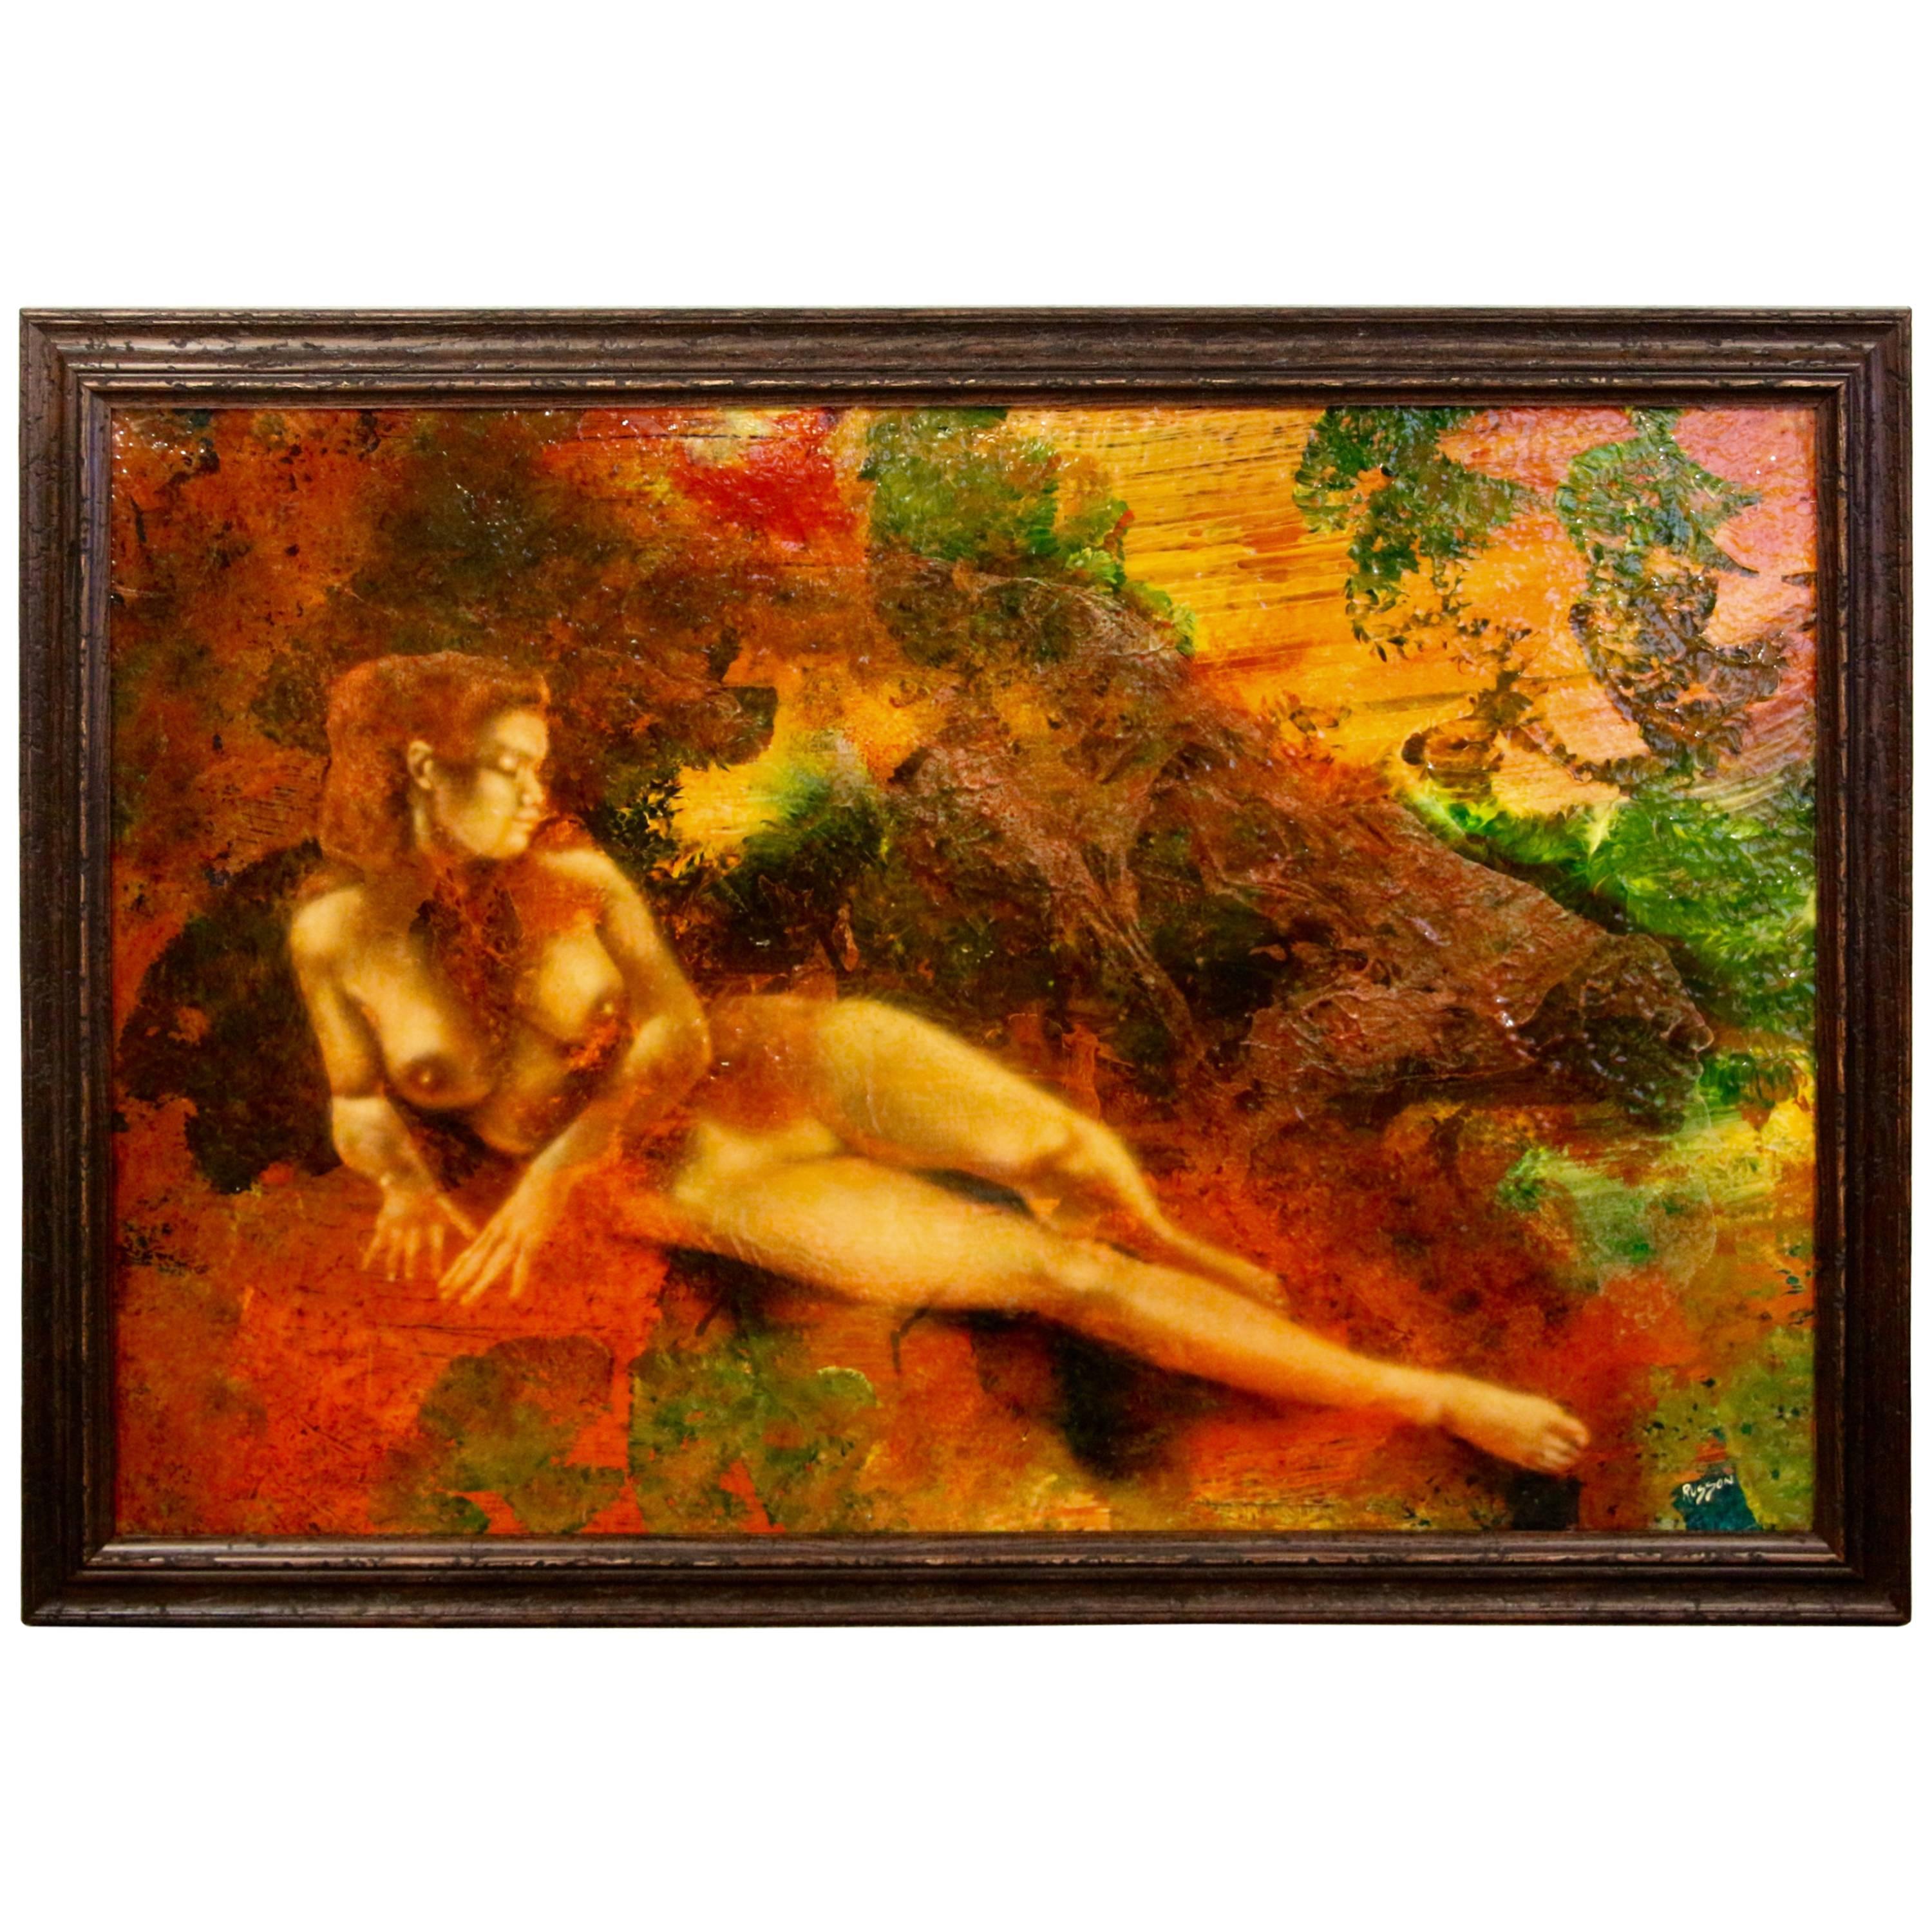 Lester Russon "Nude" Painting For Sale